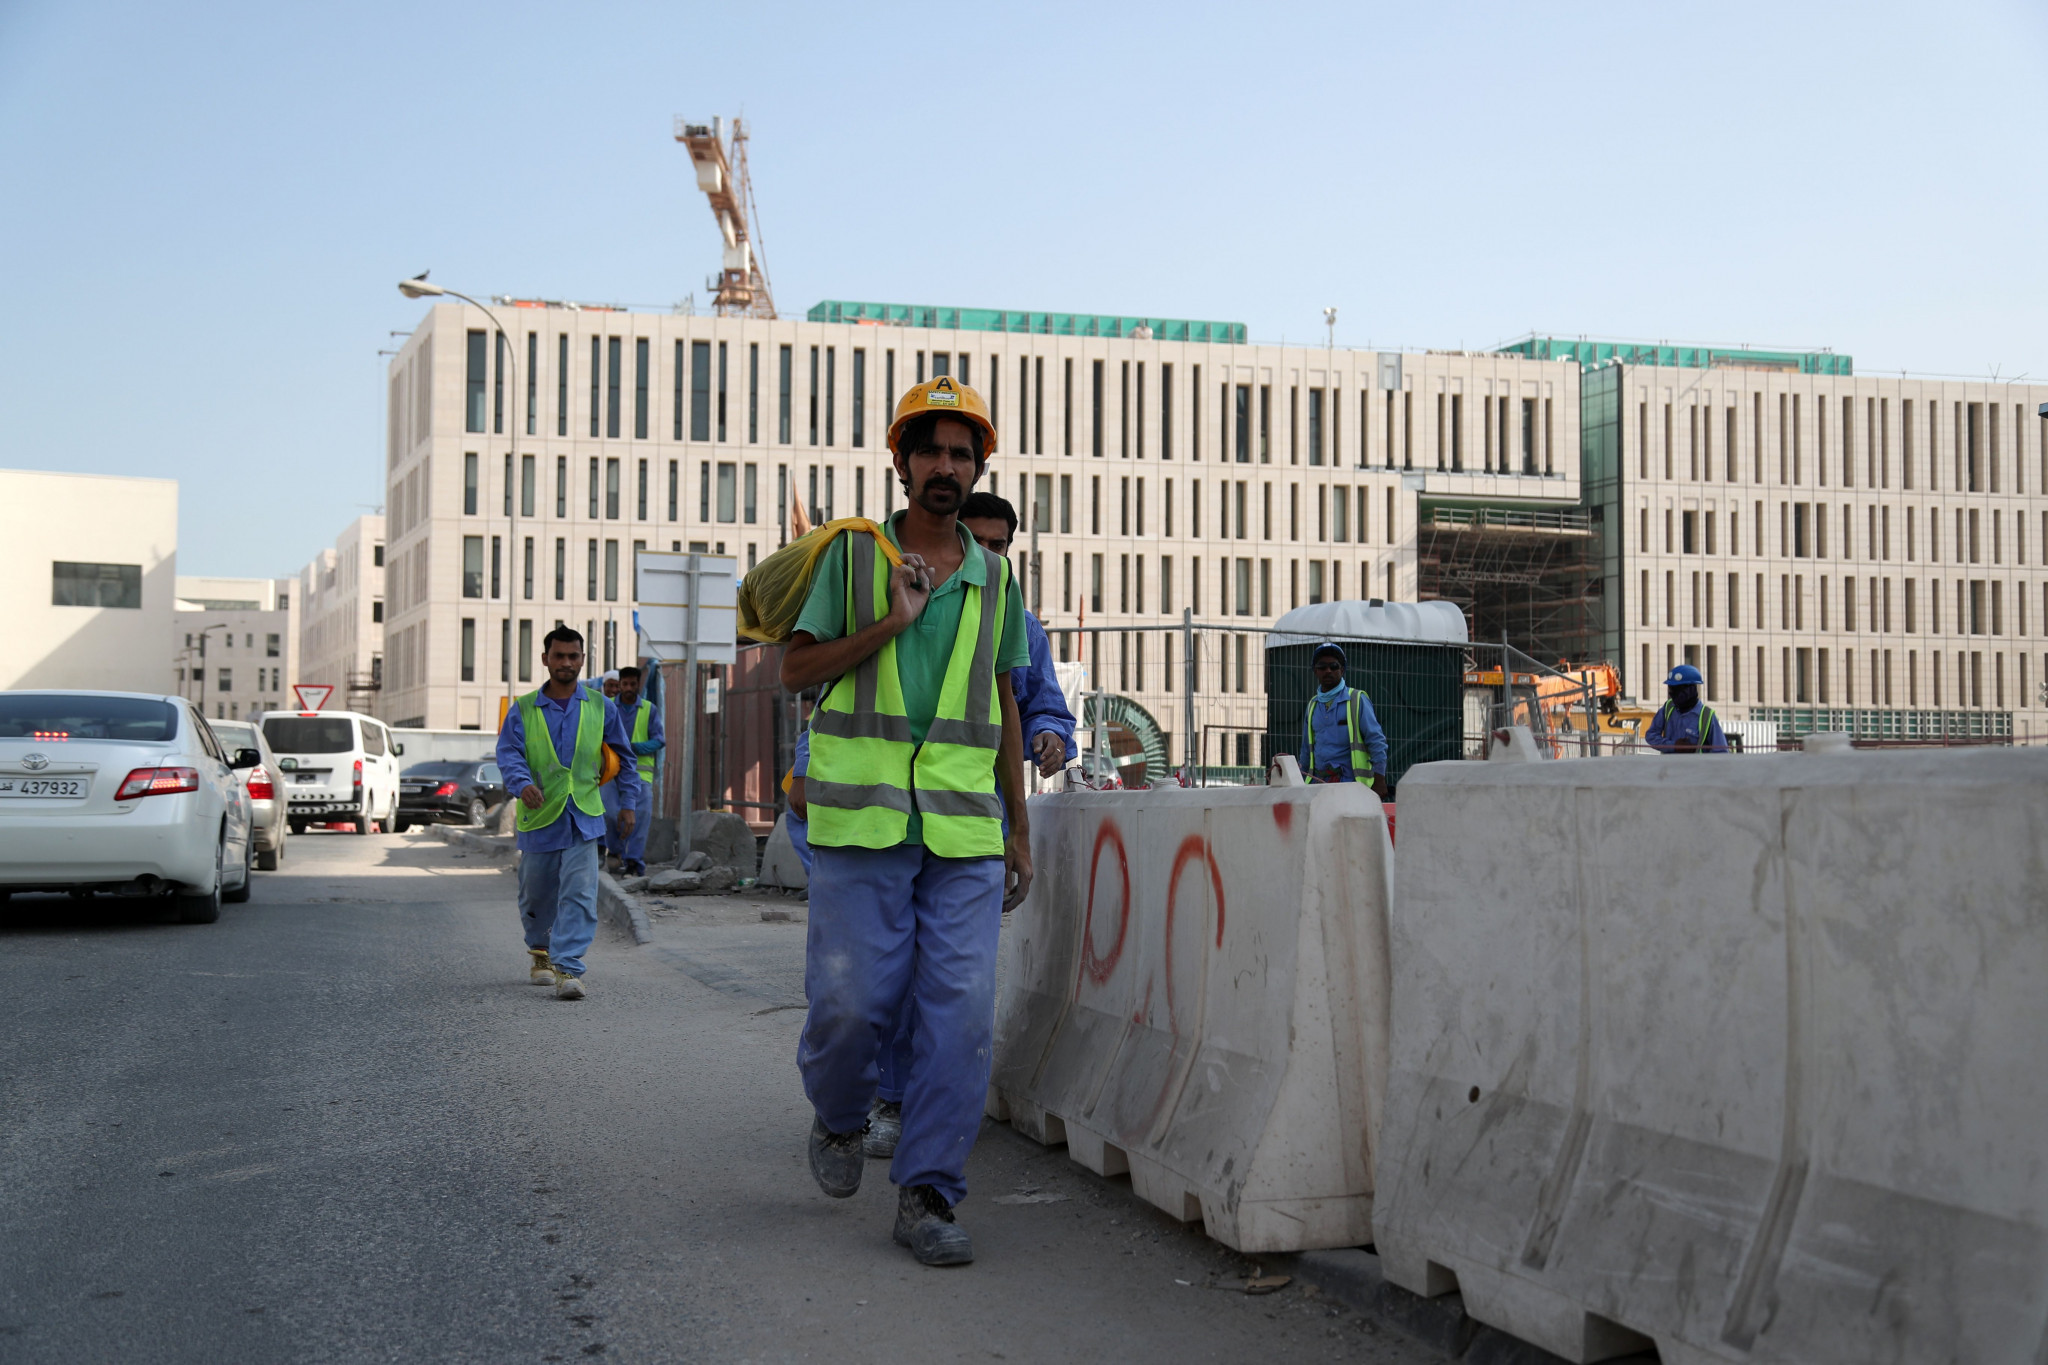 Qatar's migrant workers rights have been a talking point in the build-up to the FIFA World Cup ©Getty Images